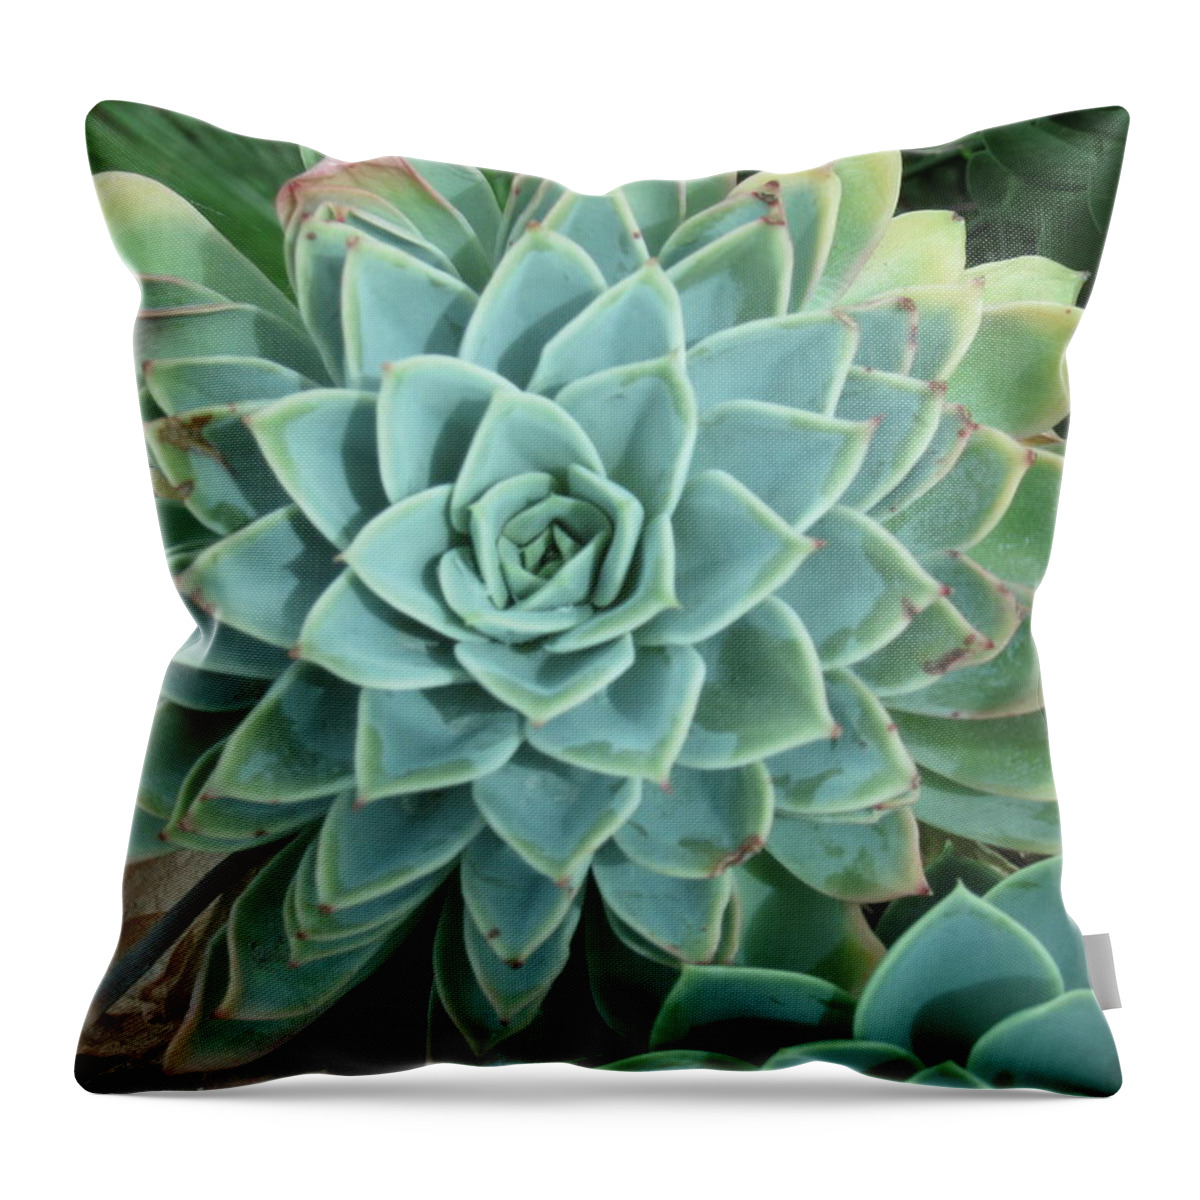  Throw Pillow featuring the photograph Mandala by Ron Monsour